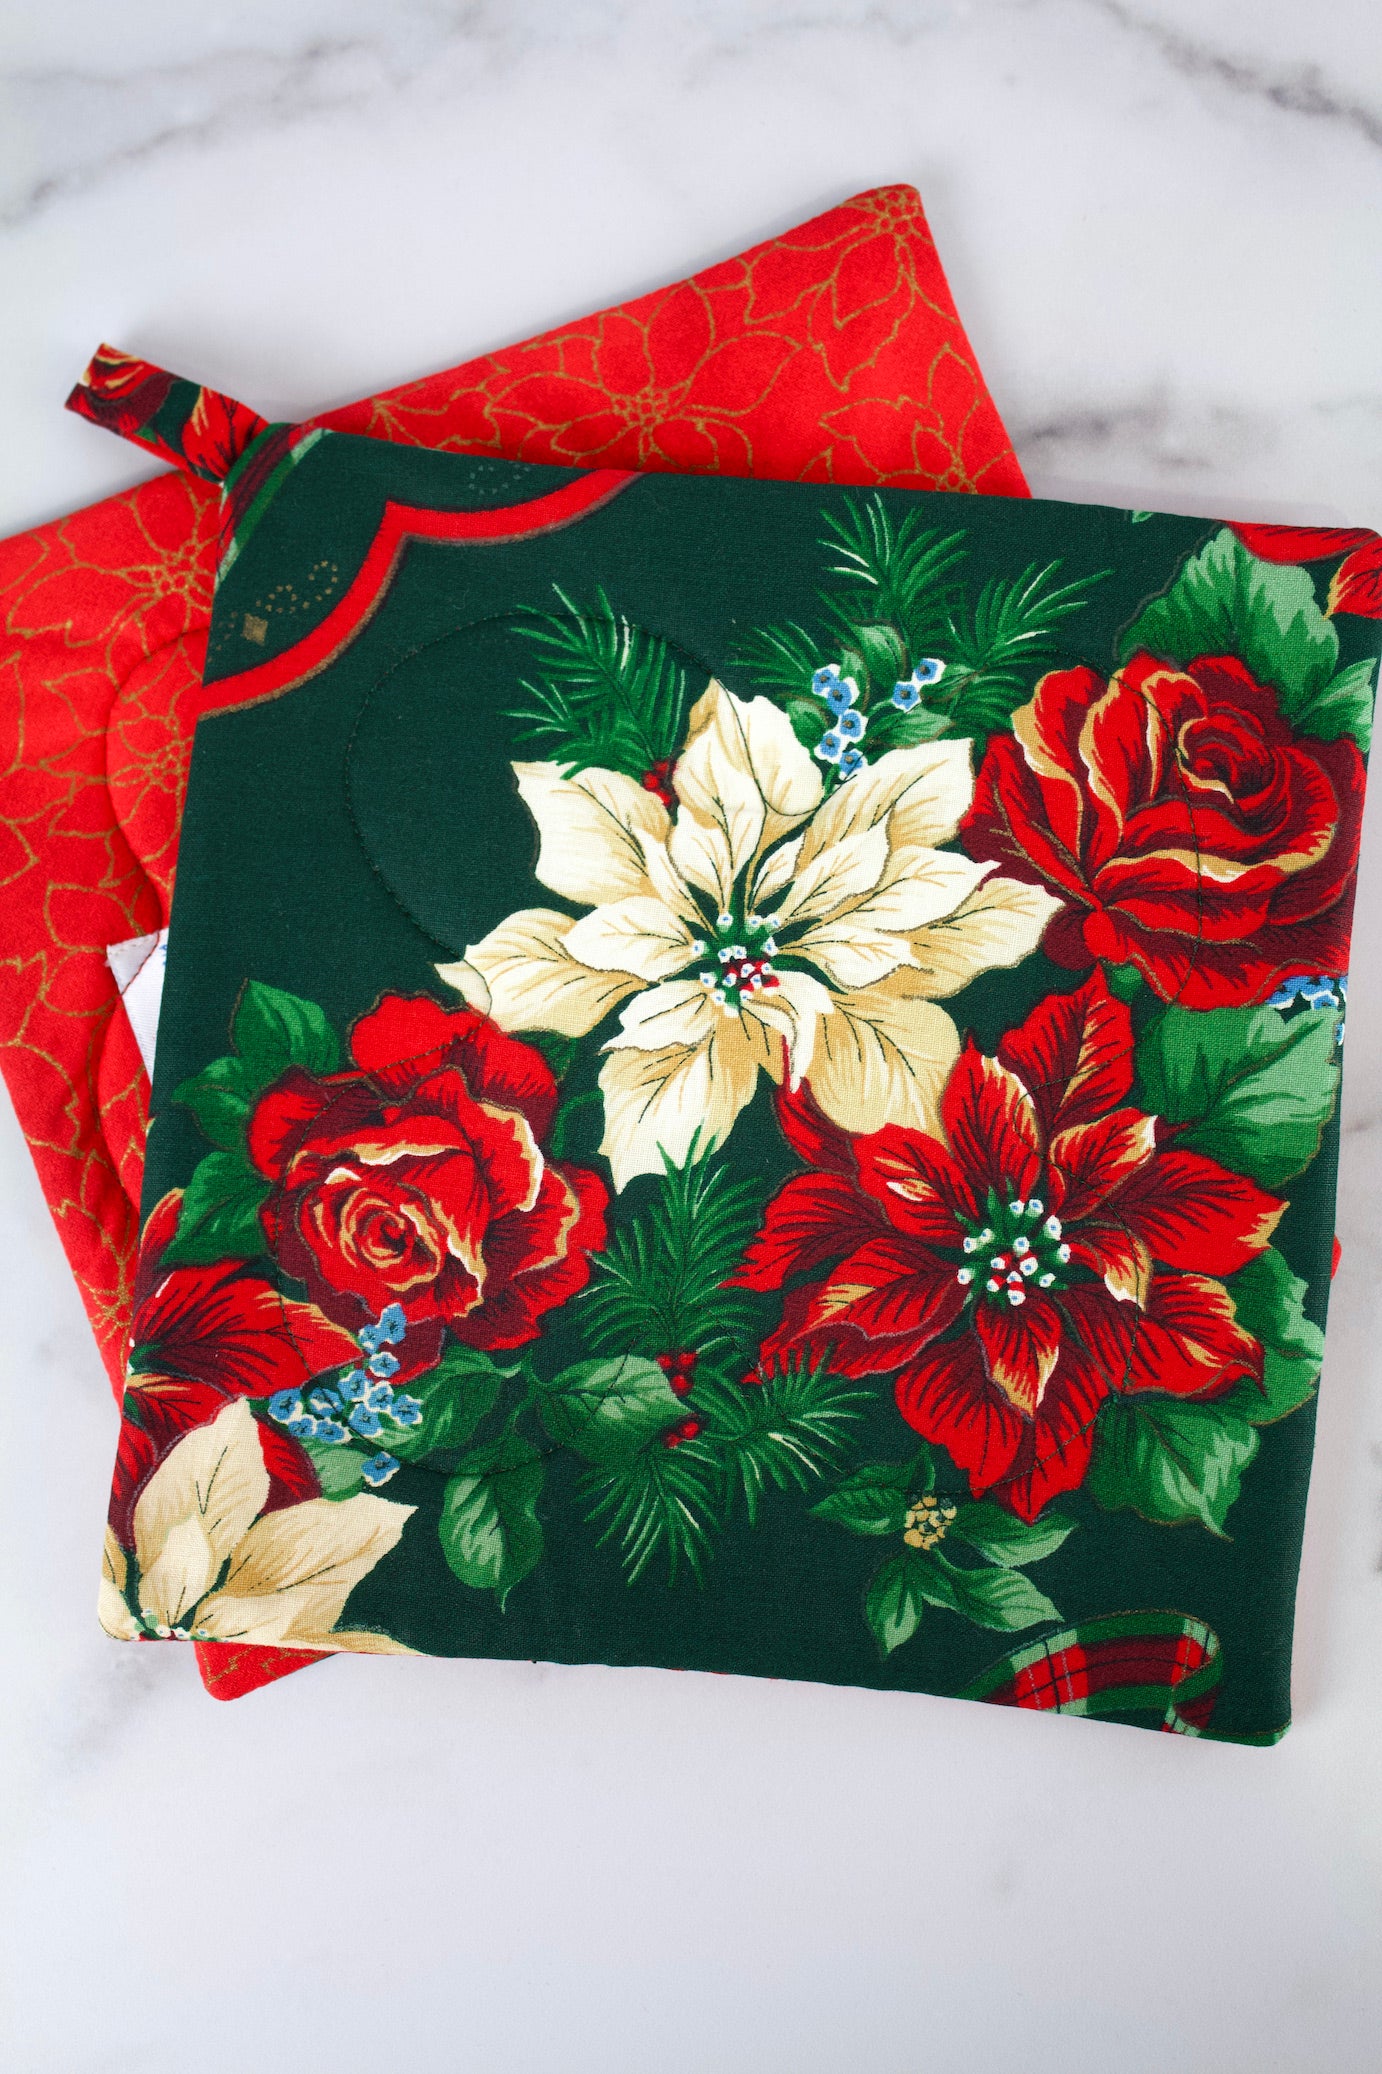 Poinsettia and Rose Potholder-The Blue Peony-Category_Pot Holder,Color_Green,Color_Maroon,Color_Red,Department_Kitchen,Pattern_Floral,Size_Traditional (Square),Theme_Christmas,Theme_Winter